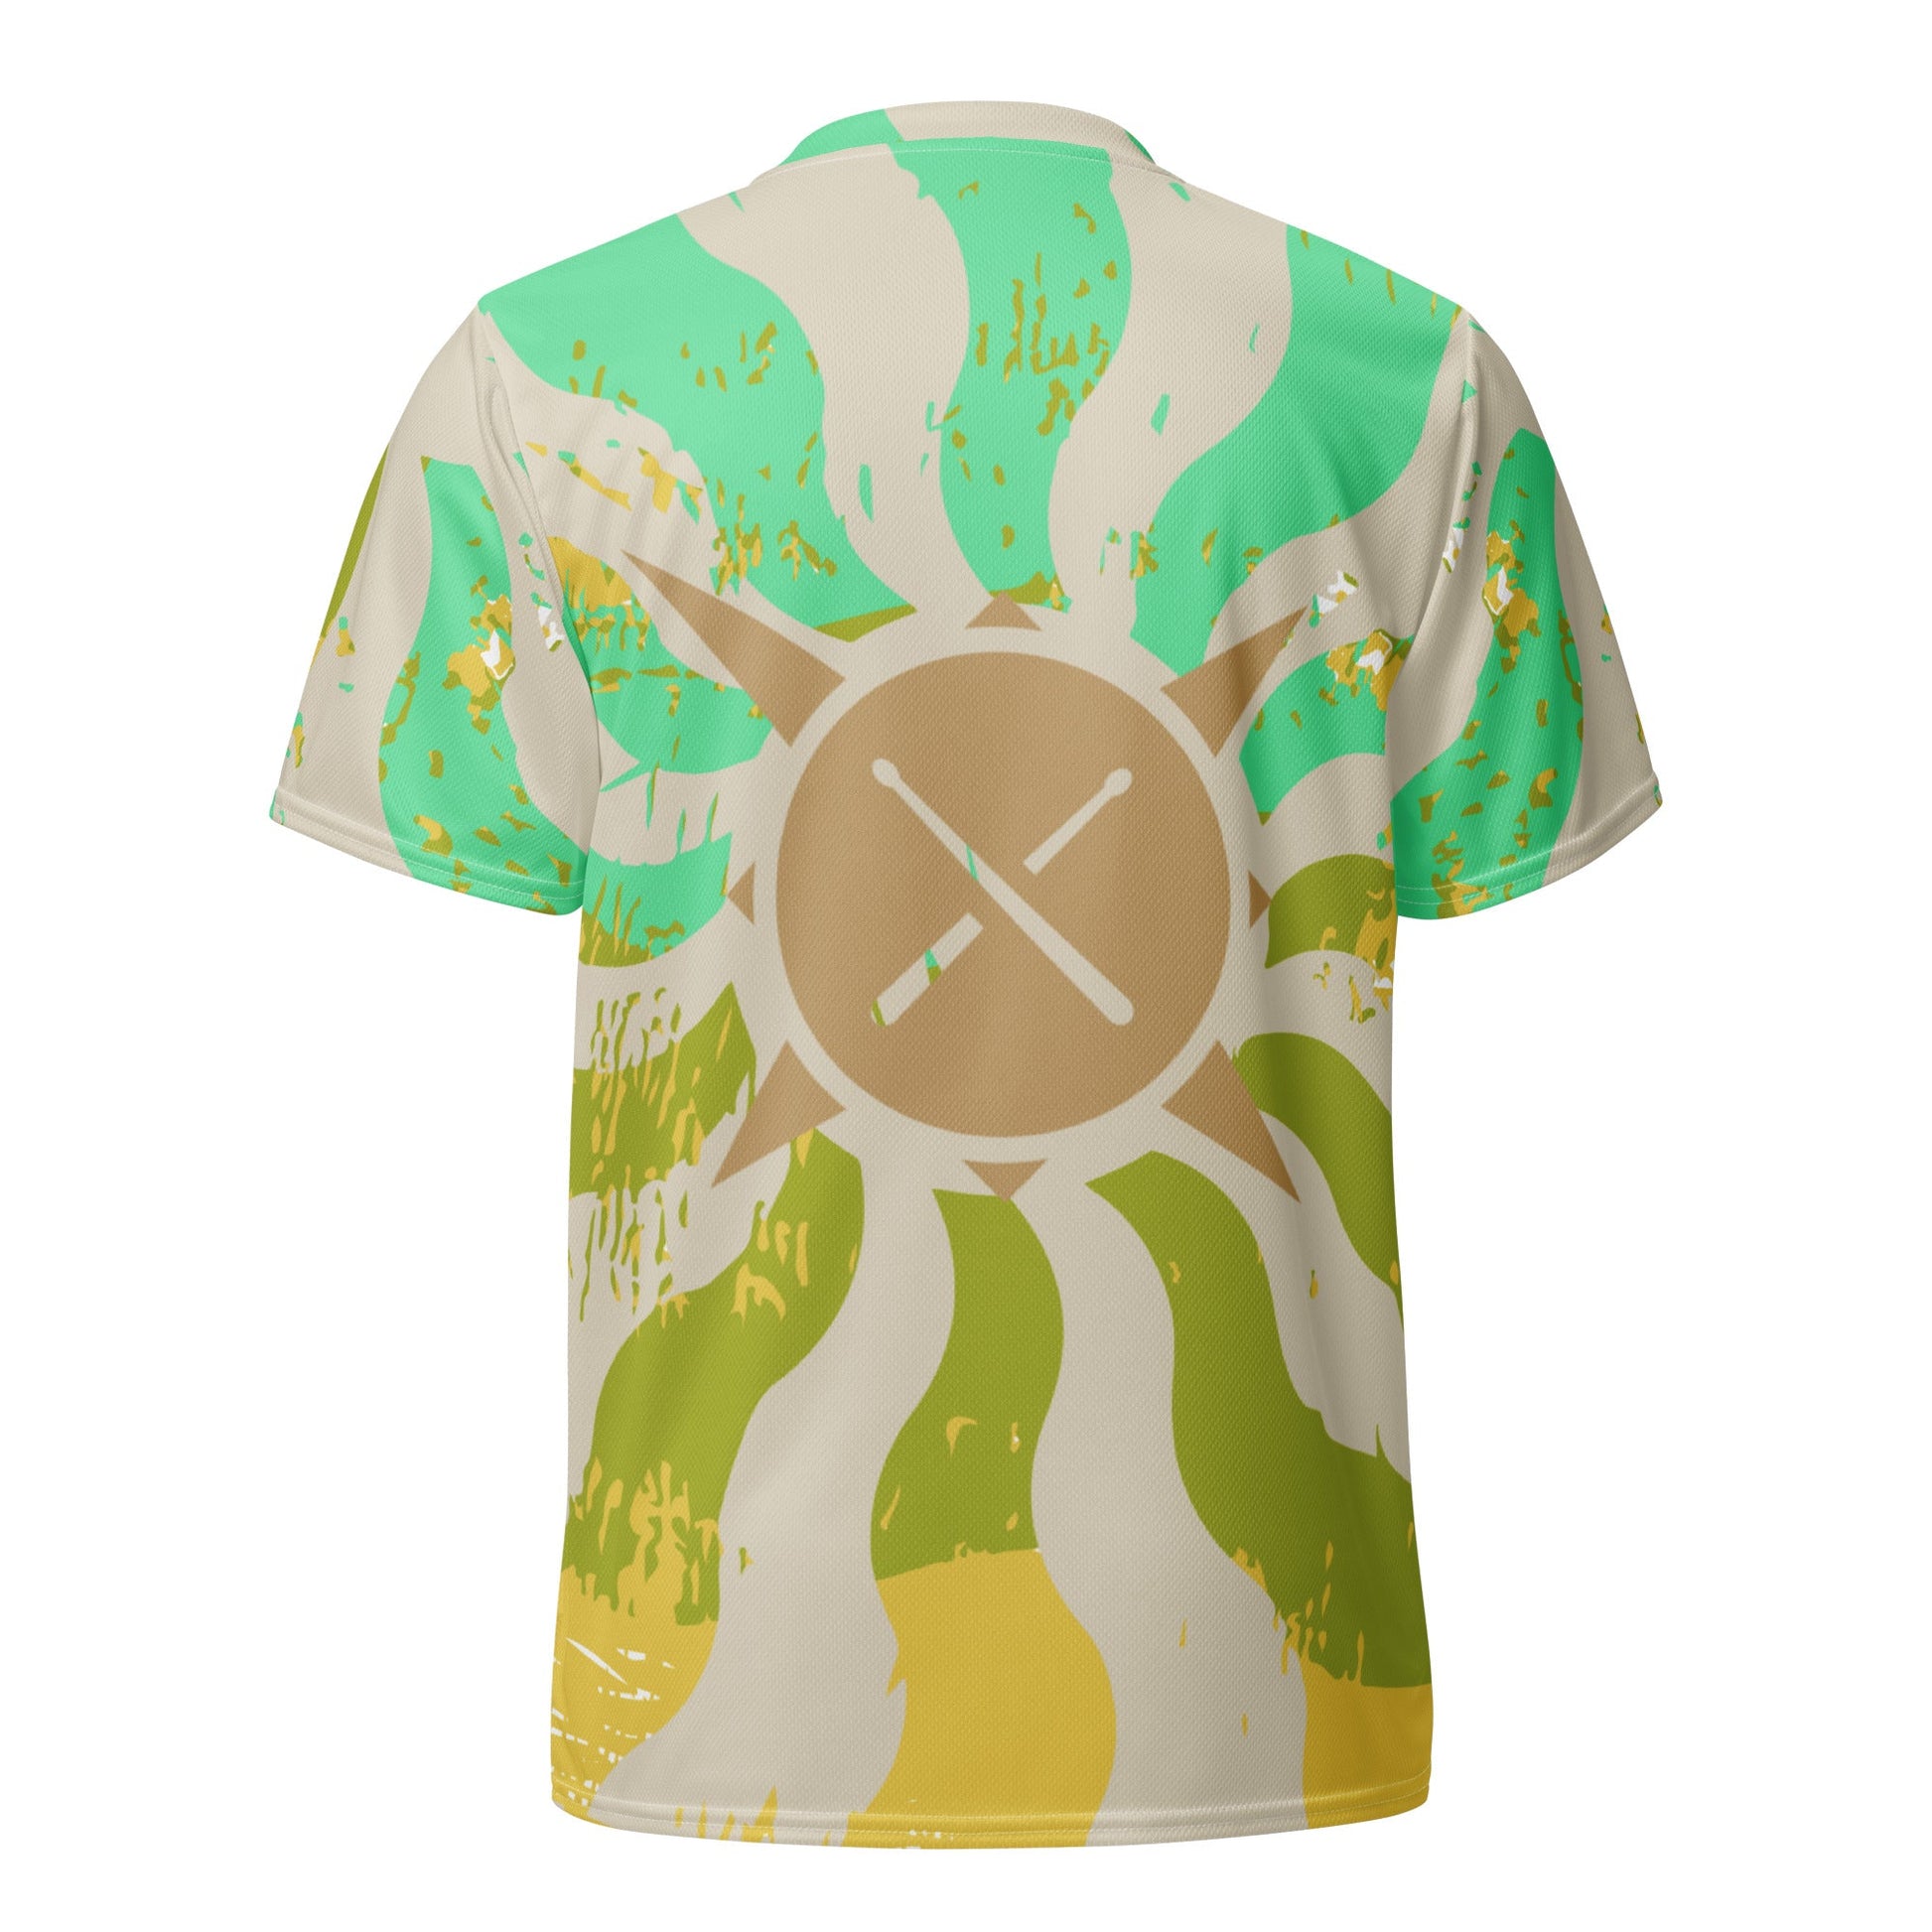 Drums of the Sun Recycled Unisex Sports Jersey - BeExtra! Apparel & More